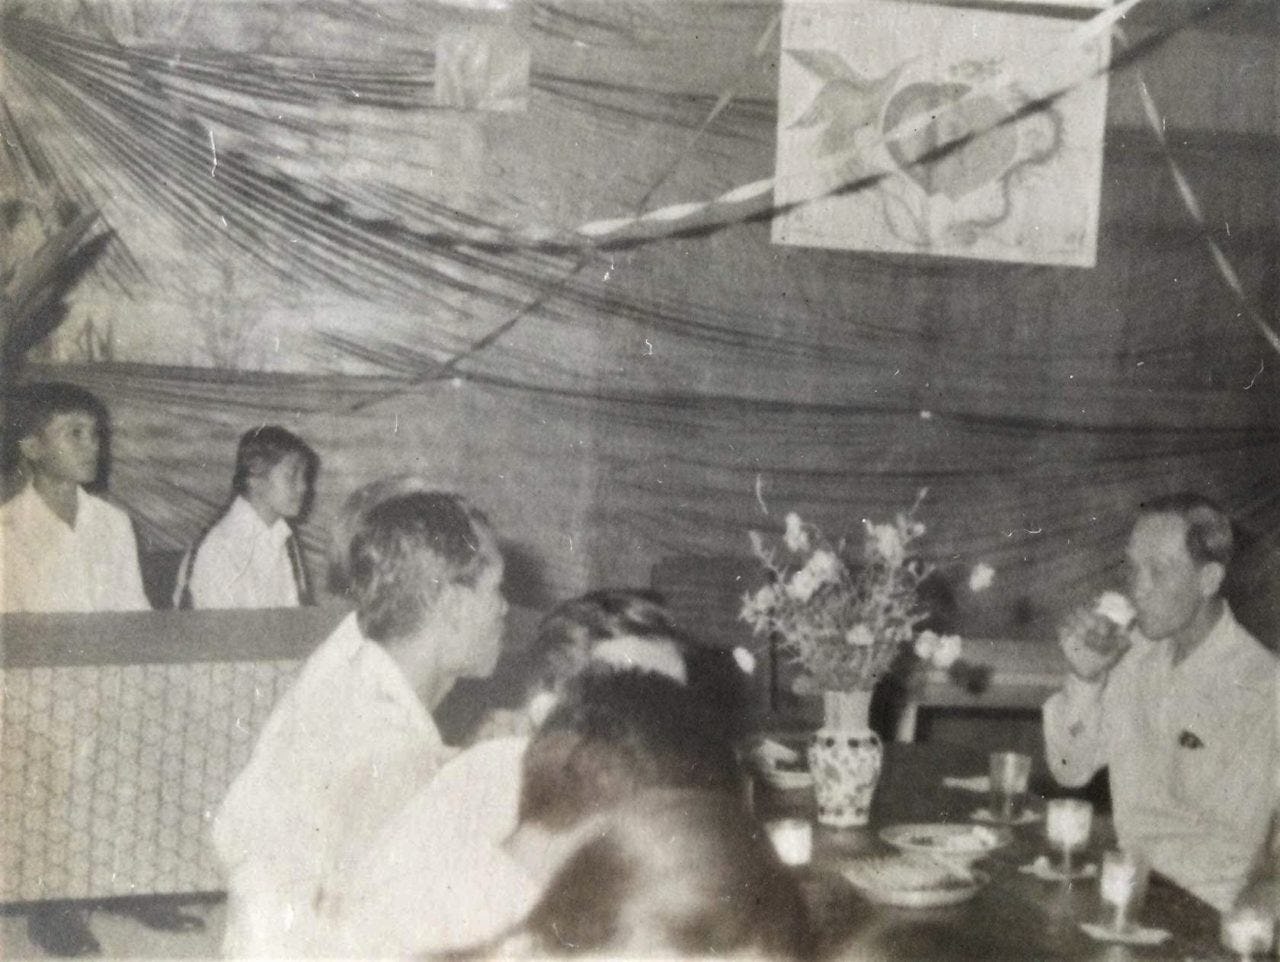  A photo of the author’s parents at their wedding. They met, fell in love and got married during their time in the Vietnamese Communist army. (Parents, left-hand side; grandfather, right-hand side).